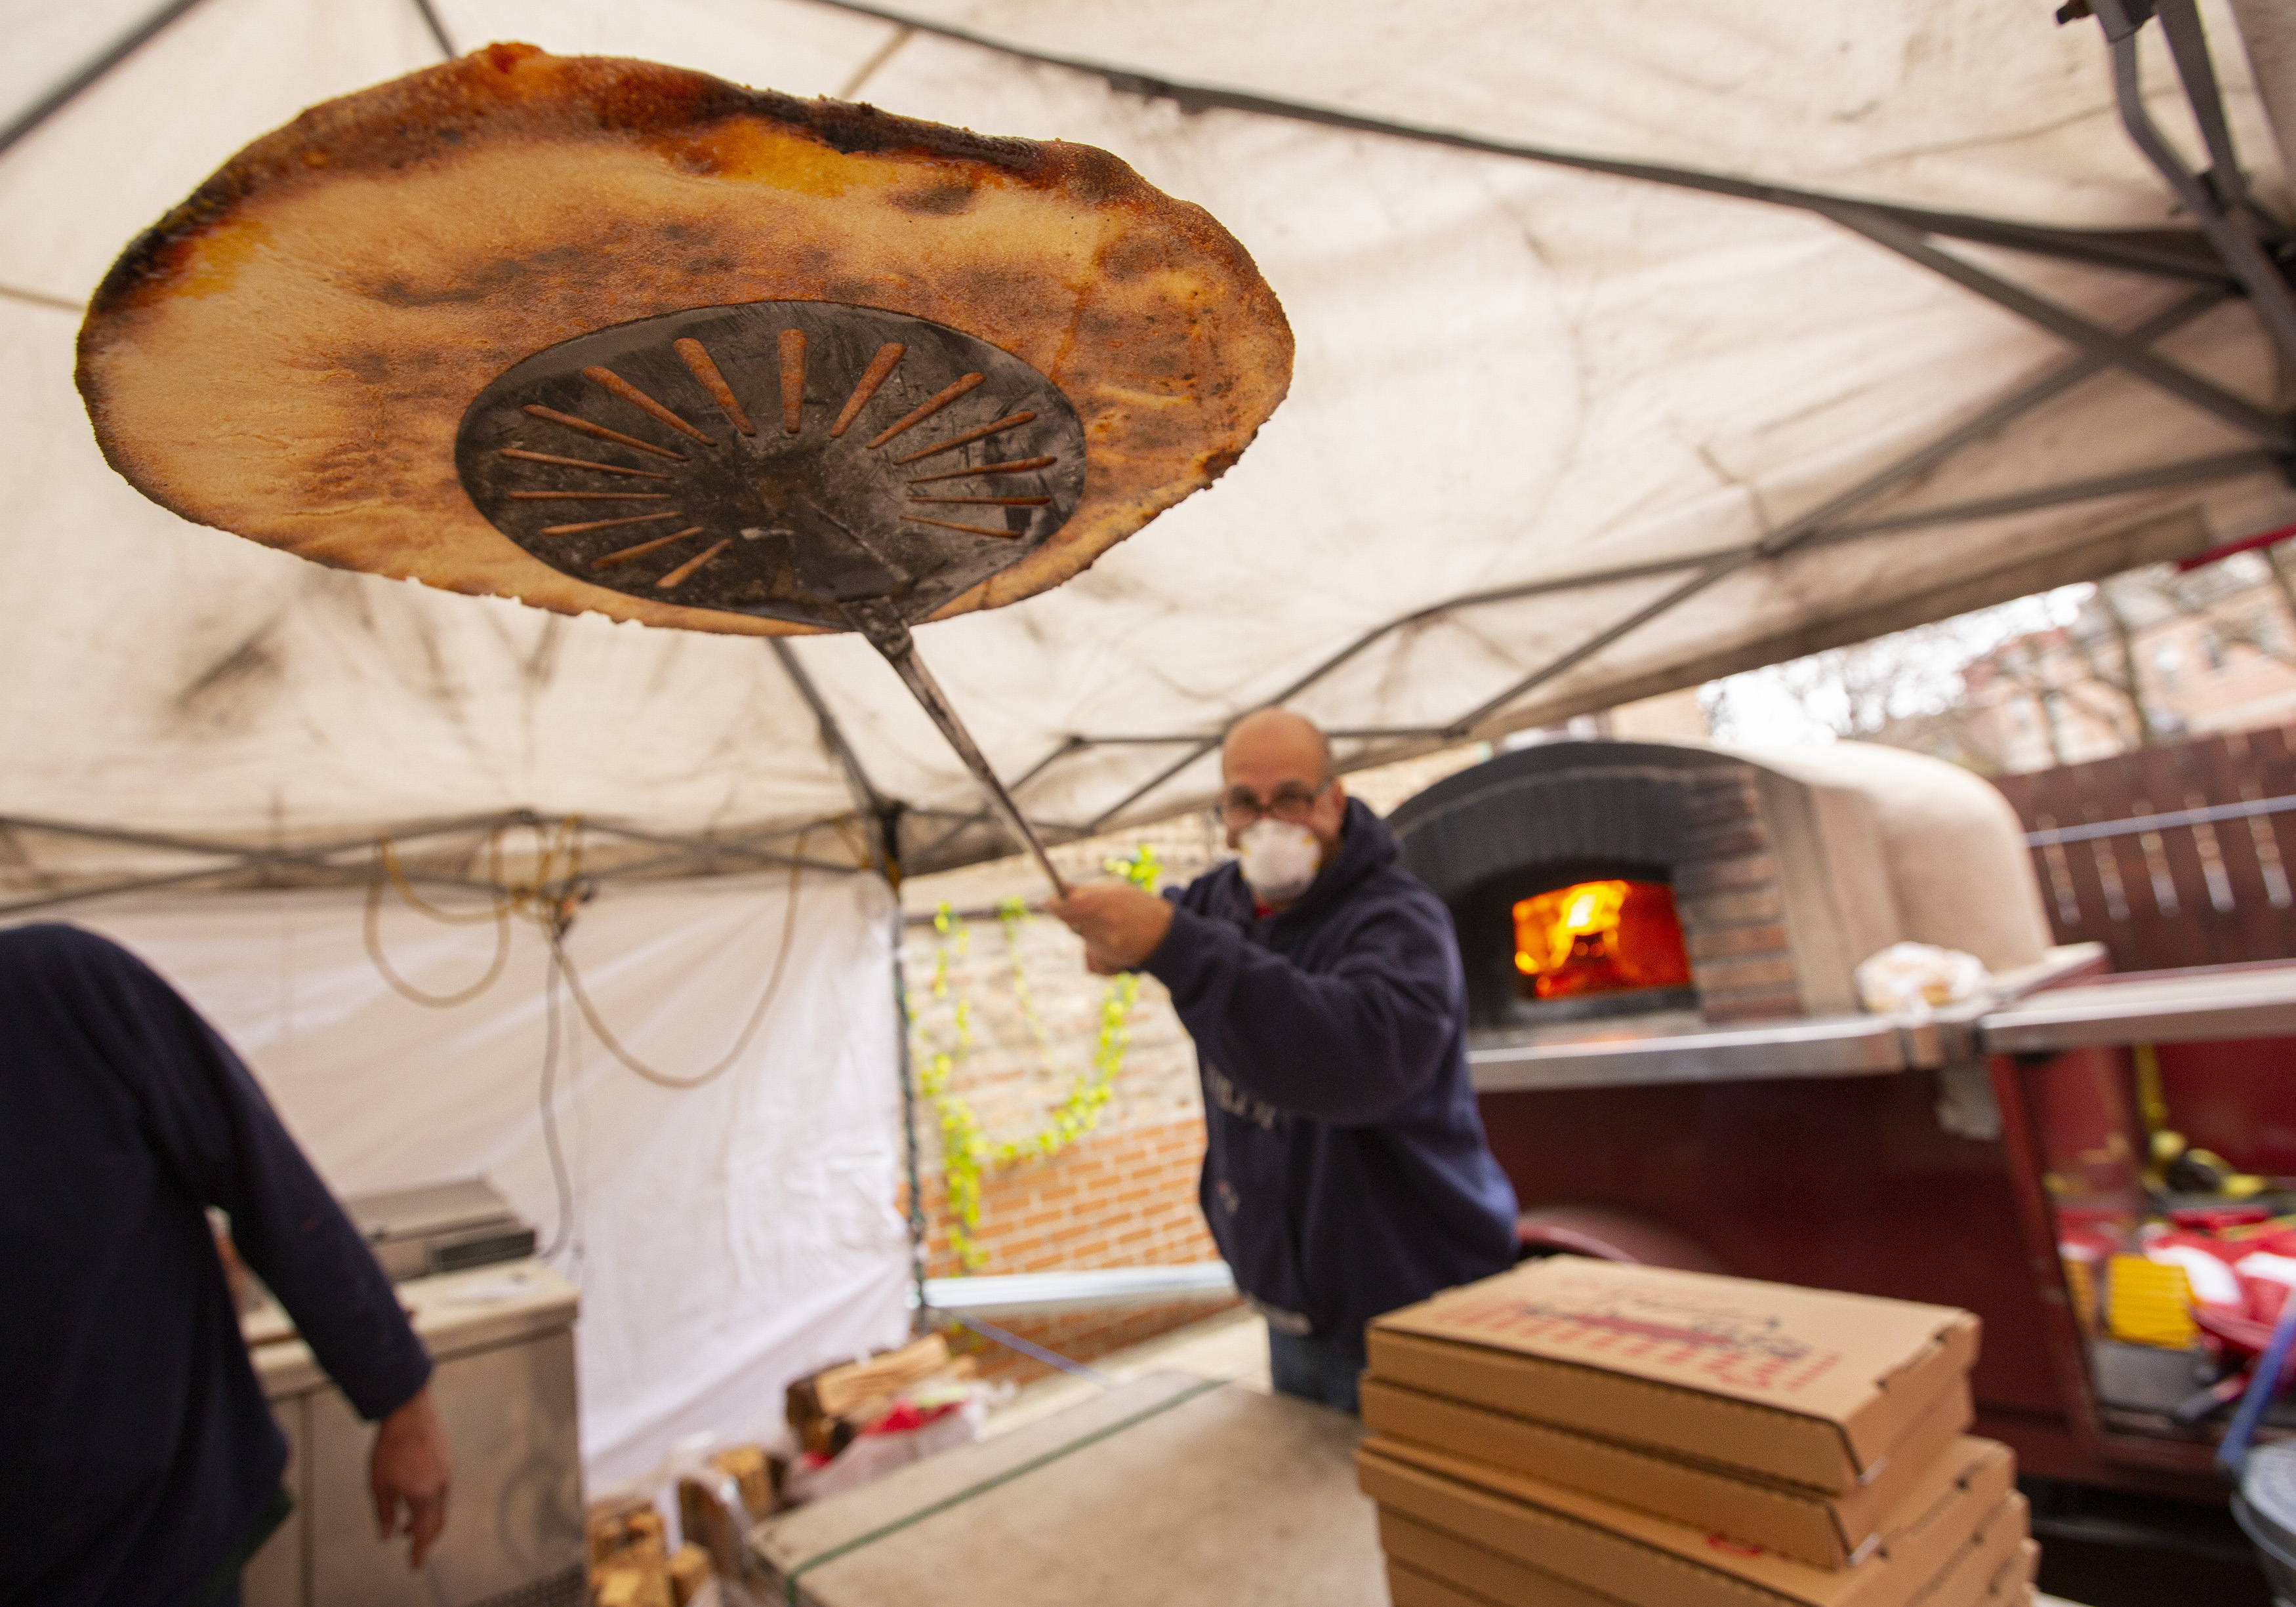 A man lifts a pizza out of an wood-burning oven outside.